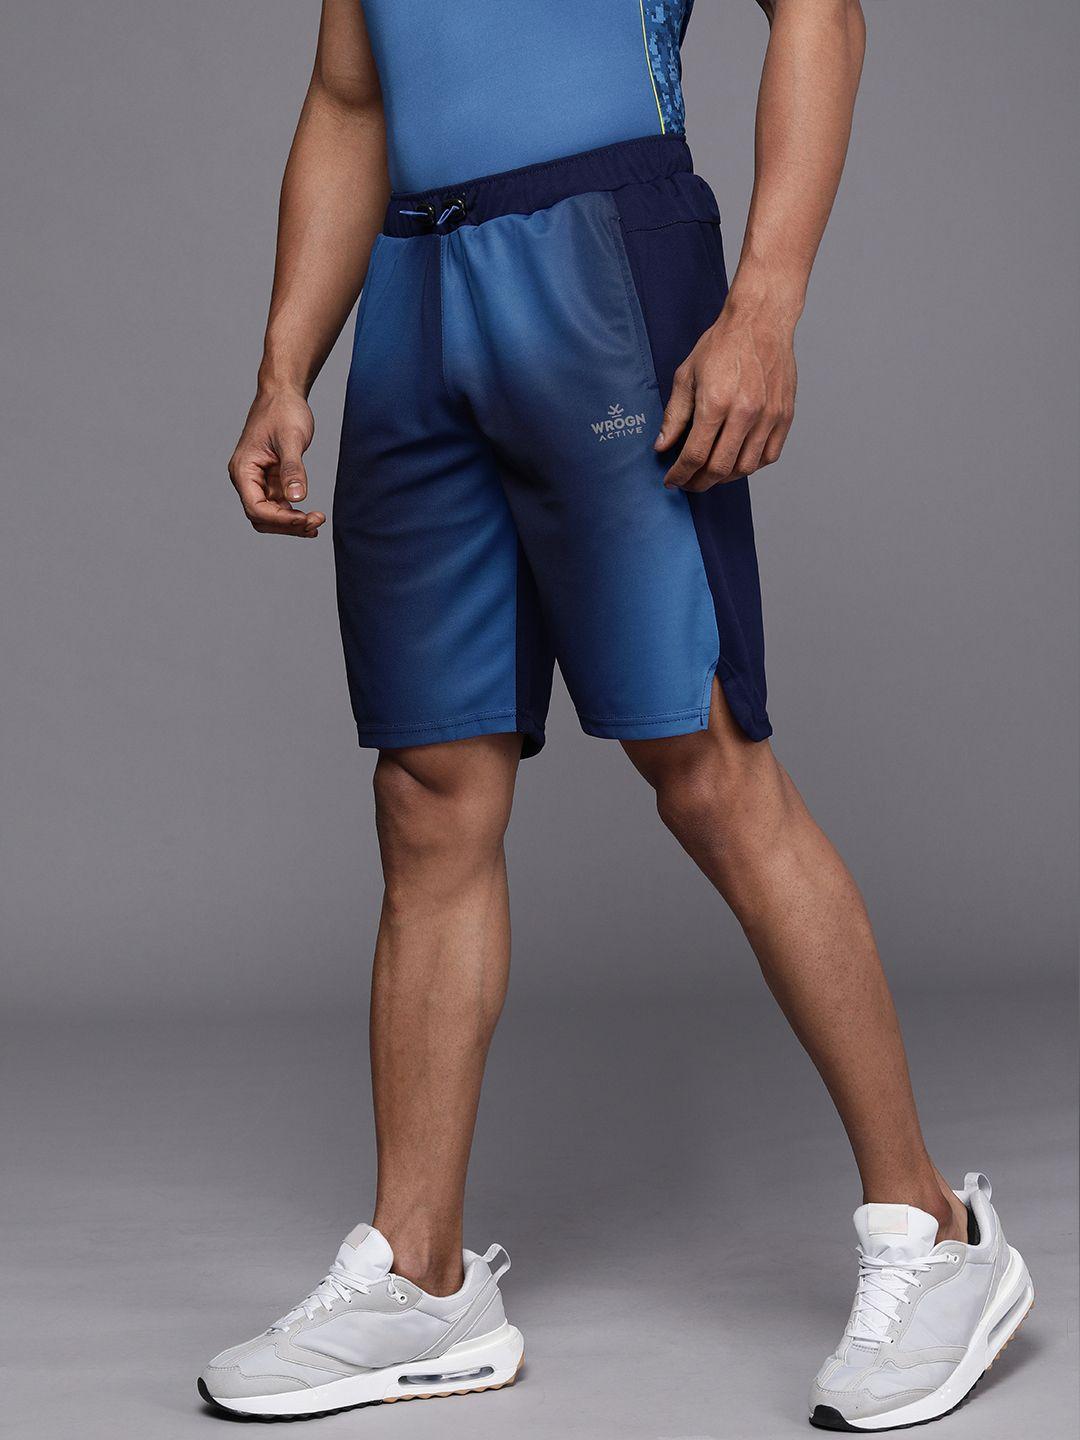 wrogn active men navy blue ombre printed sports shorts